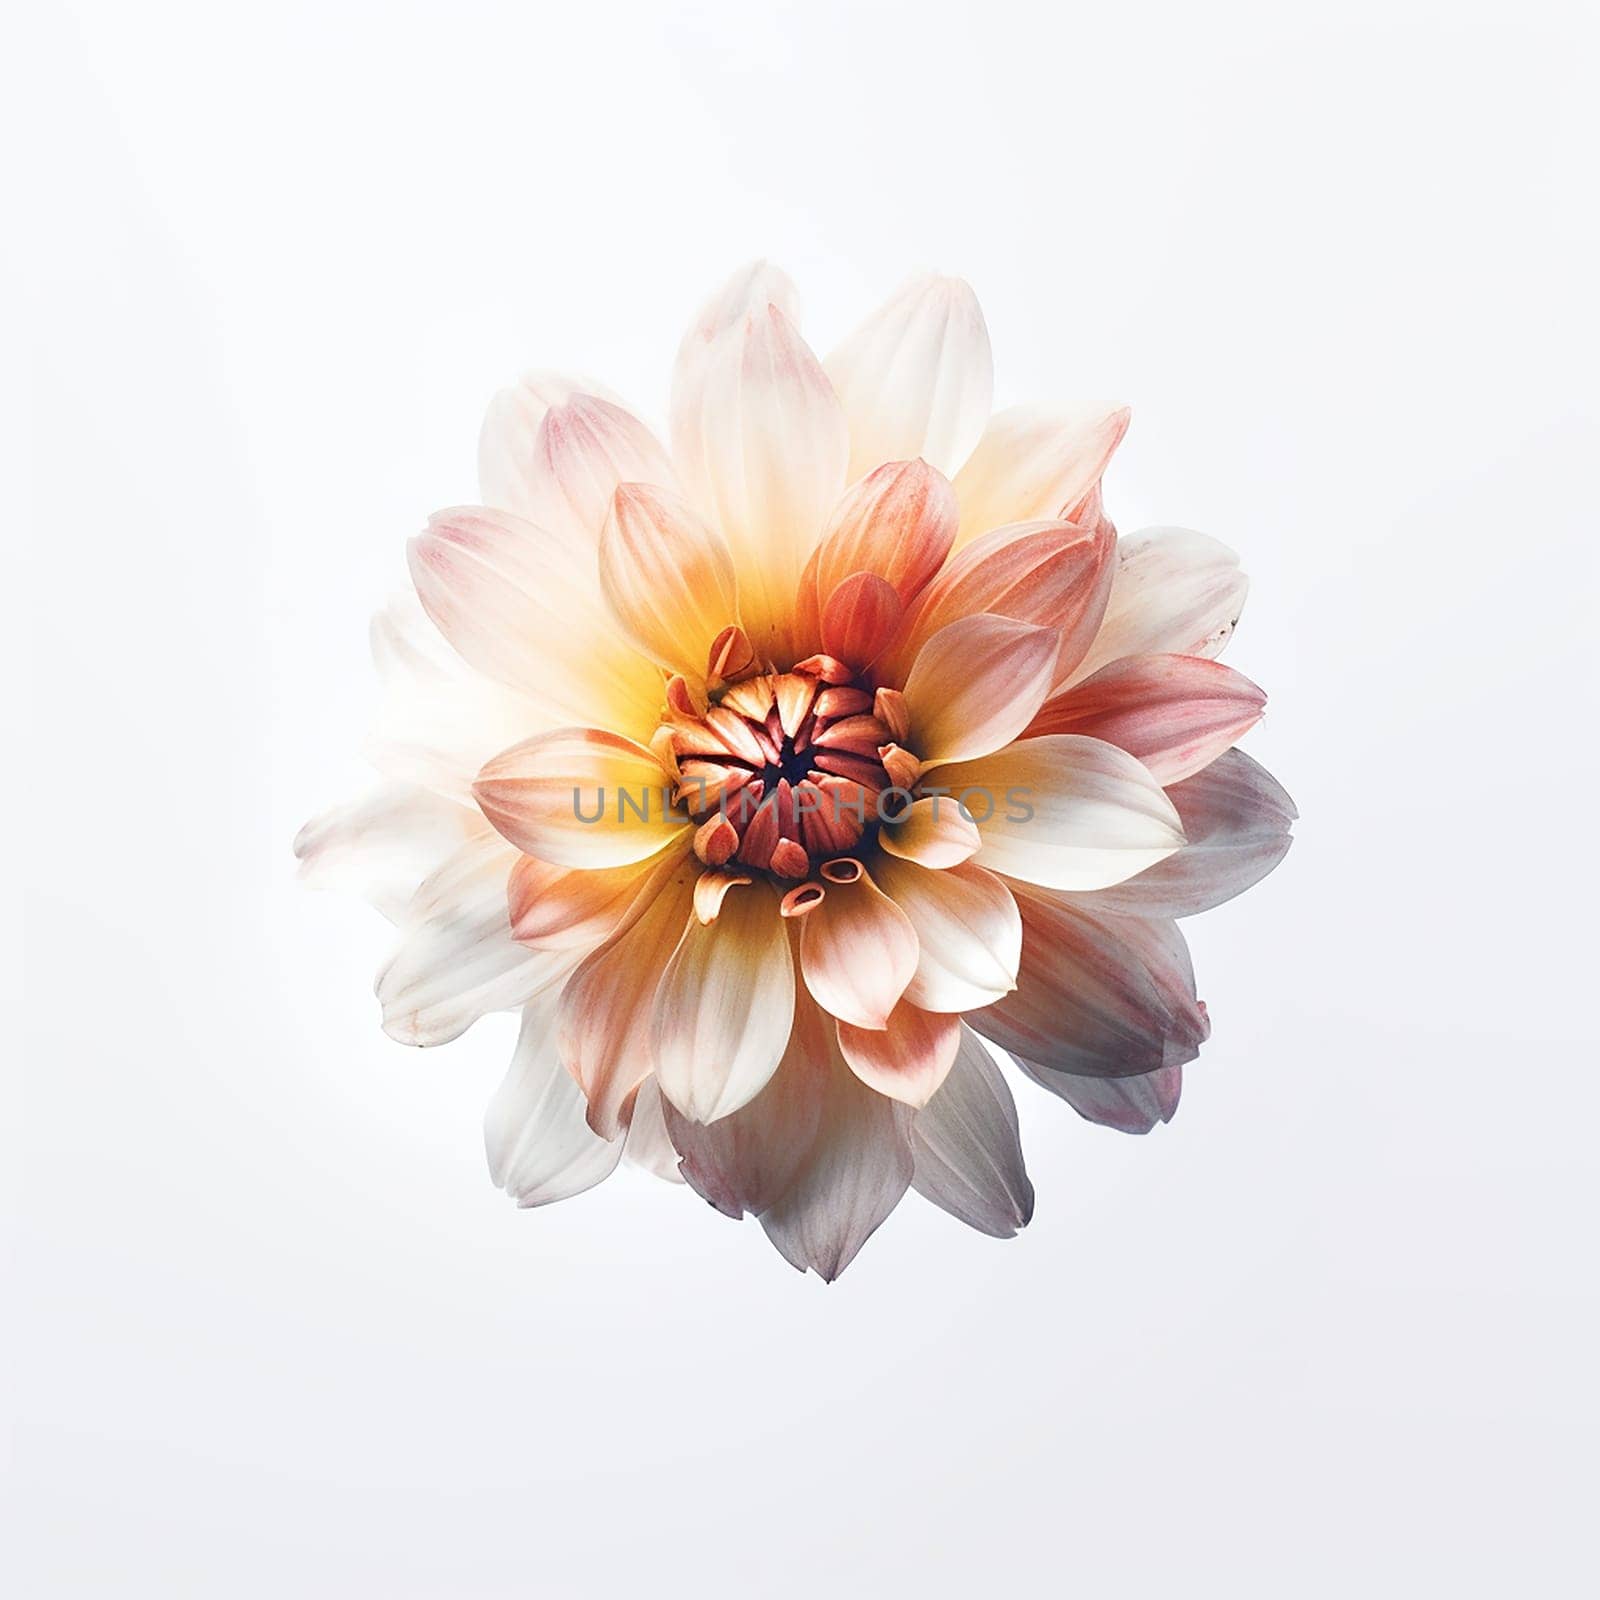 An isolated delicate dahlia with gradient petals against a white background